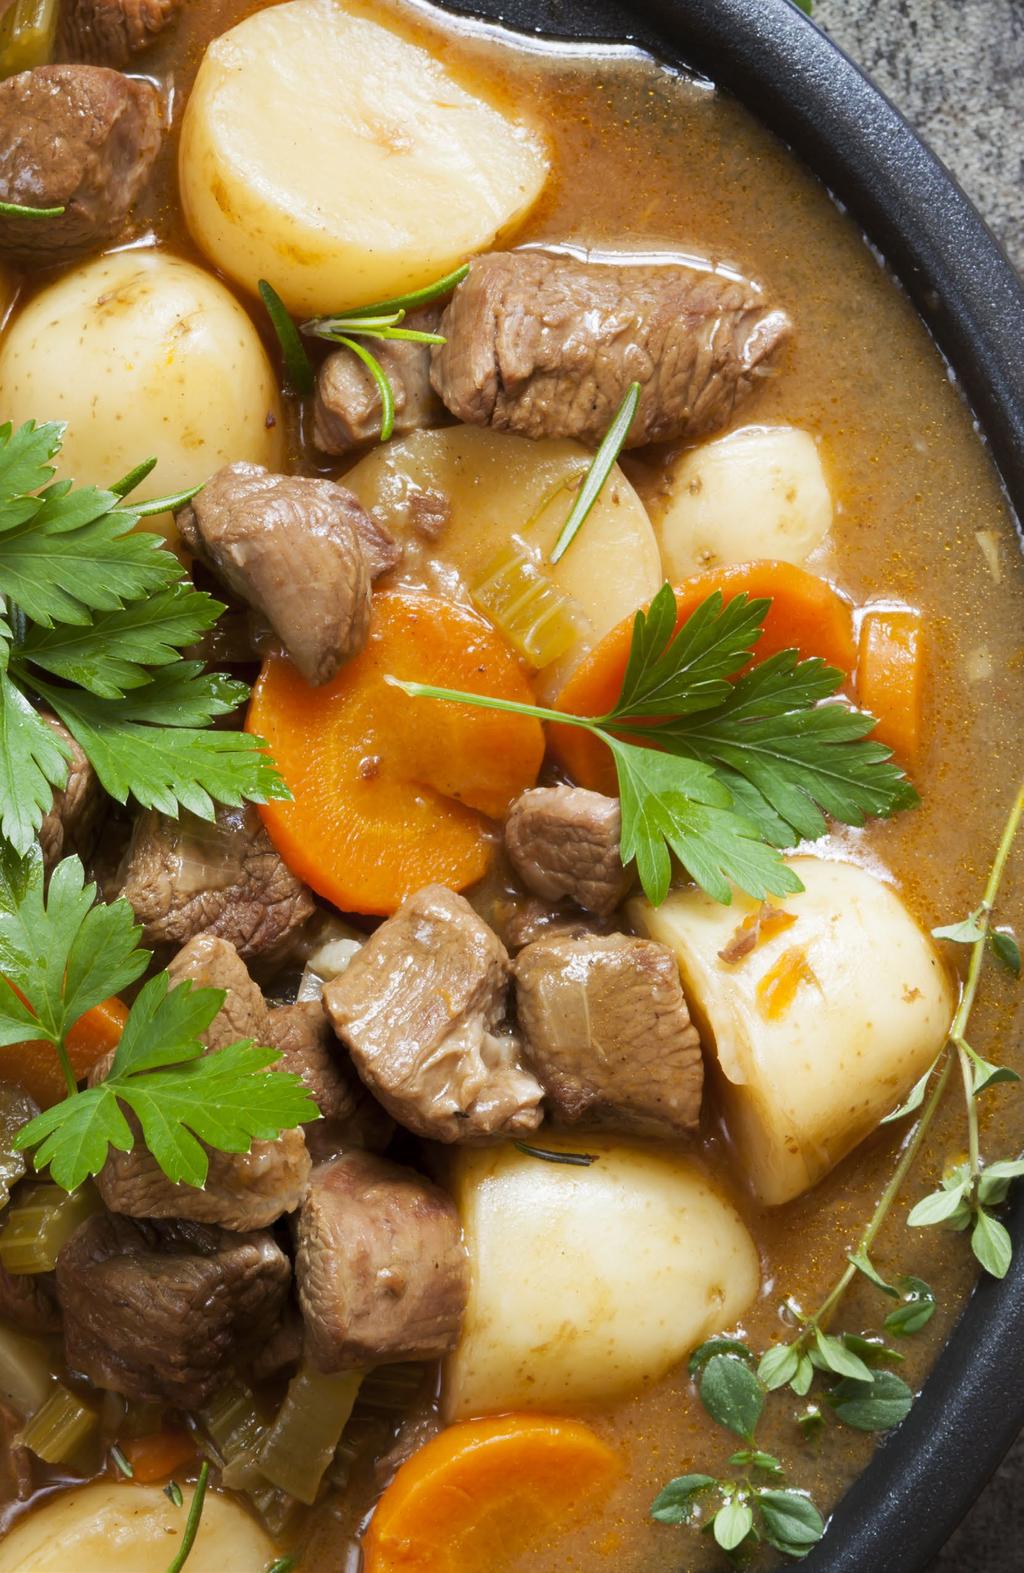 SLOW COOKER LAMB STEW 4-6 SERVINGS 2 pounds leg of lamb, chopped into cubes with excess fat and skin trimmed 2 teaspoons coconut oil 3 leeks, chopped with dark green tops discarded 4 large carrots,